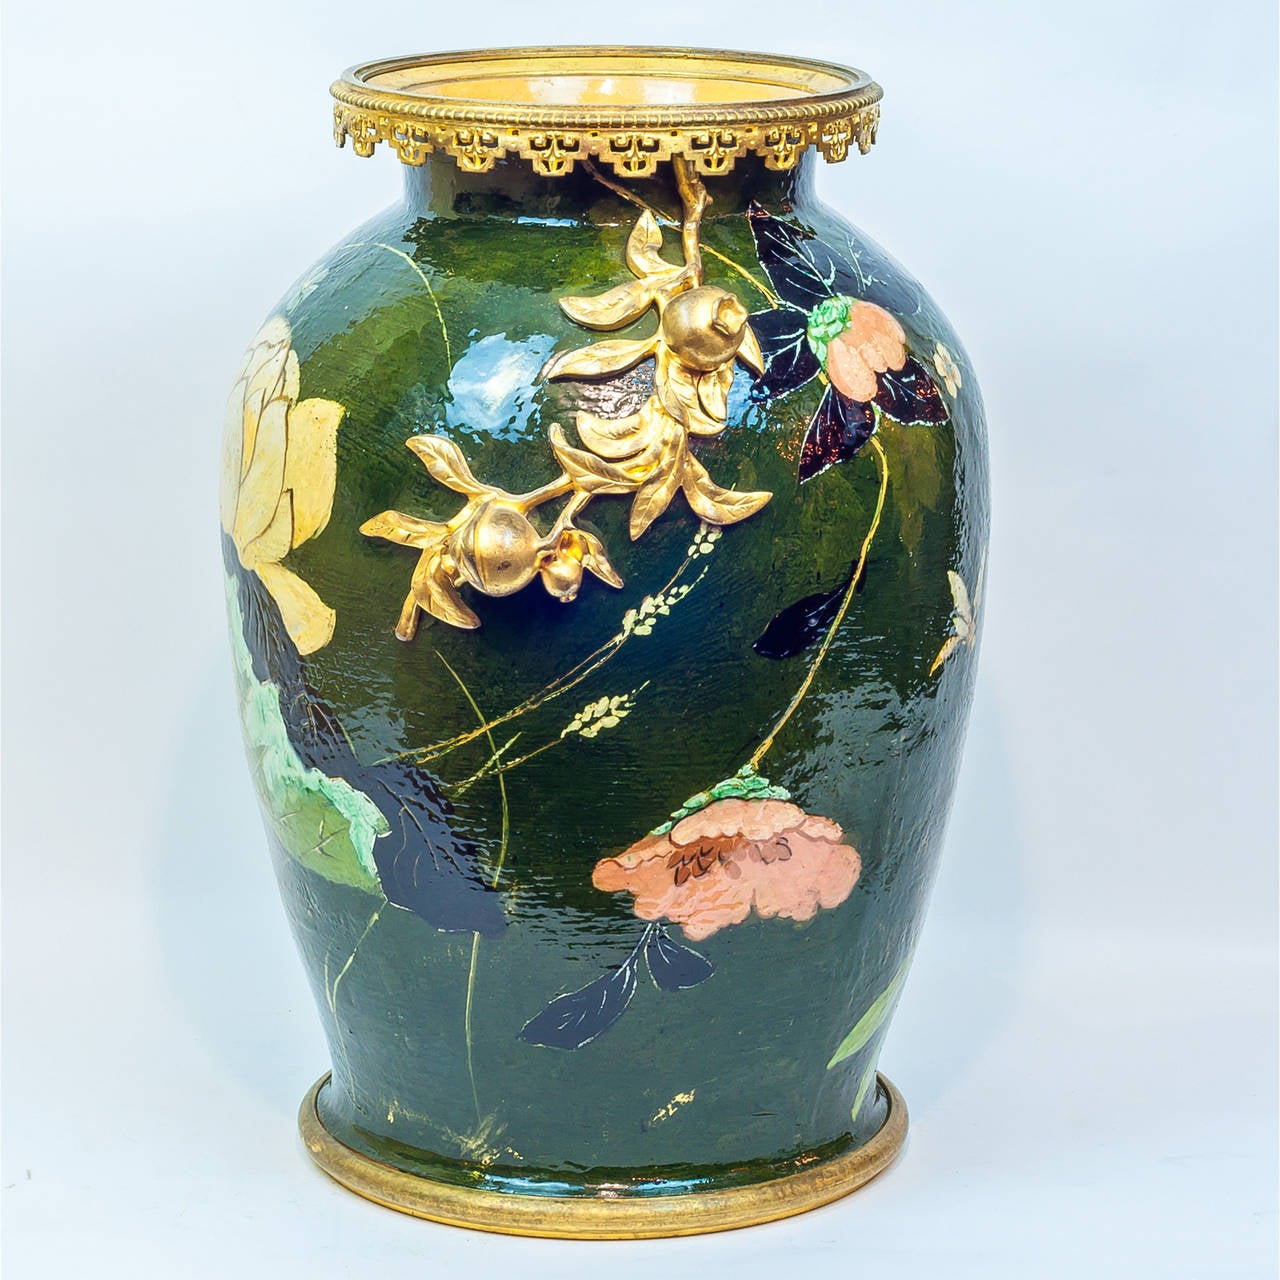 An unusual French porcelain and bronze aesthetic vase with floral decorations.
Stock number: DA23.